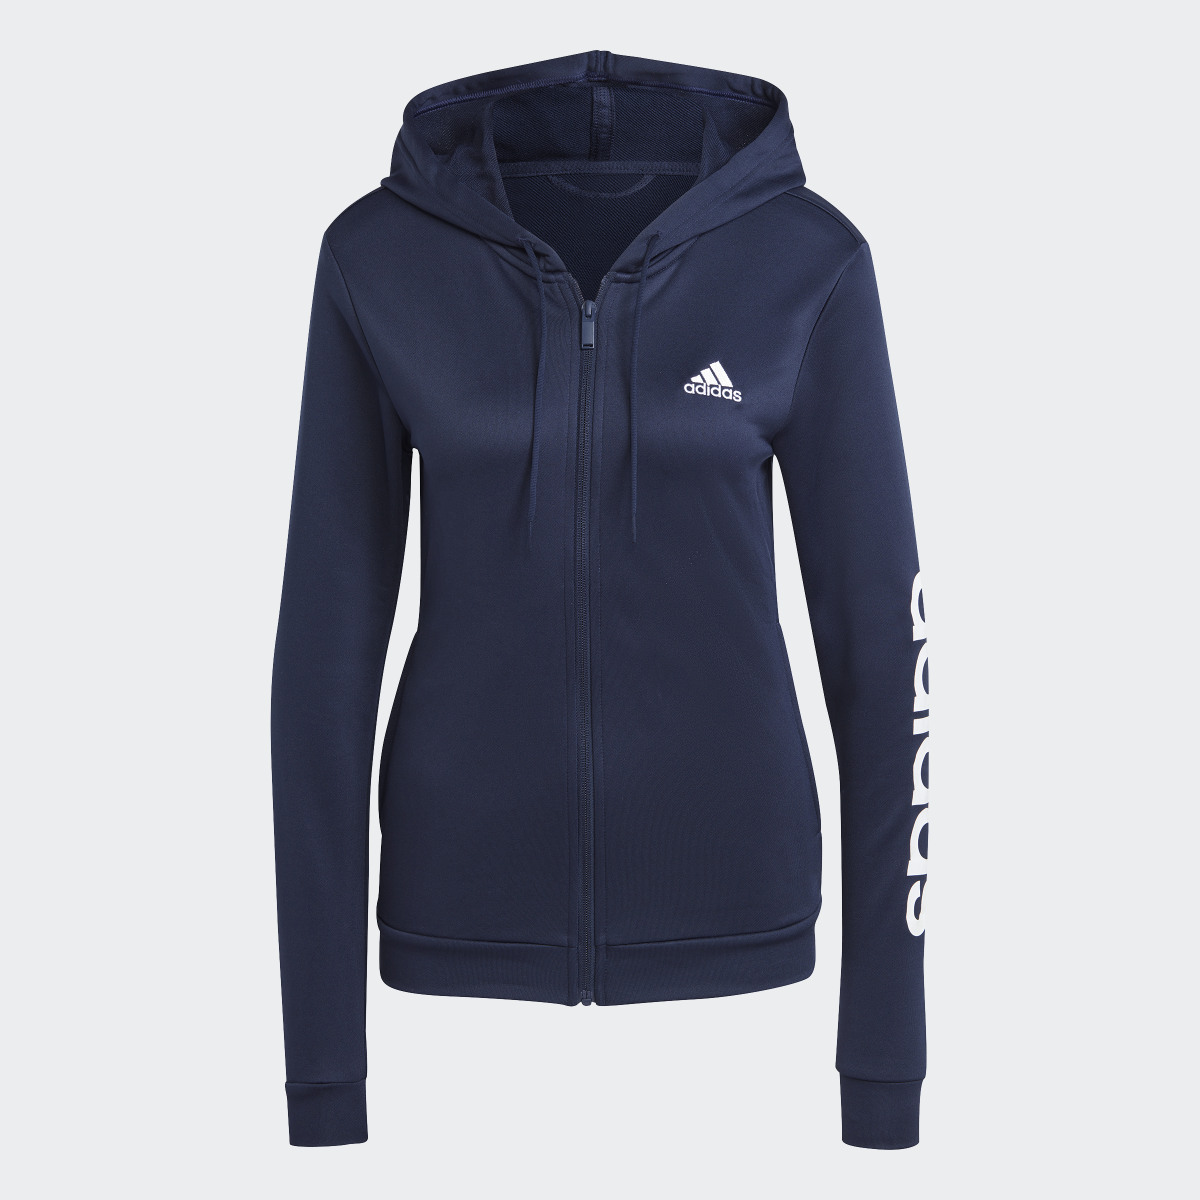 Adidas Track suit Linear. 6